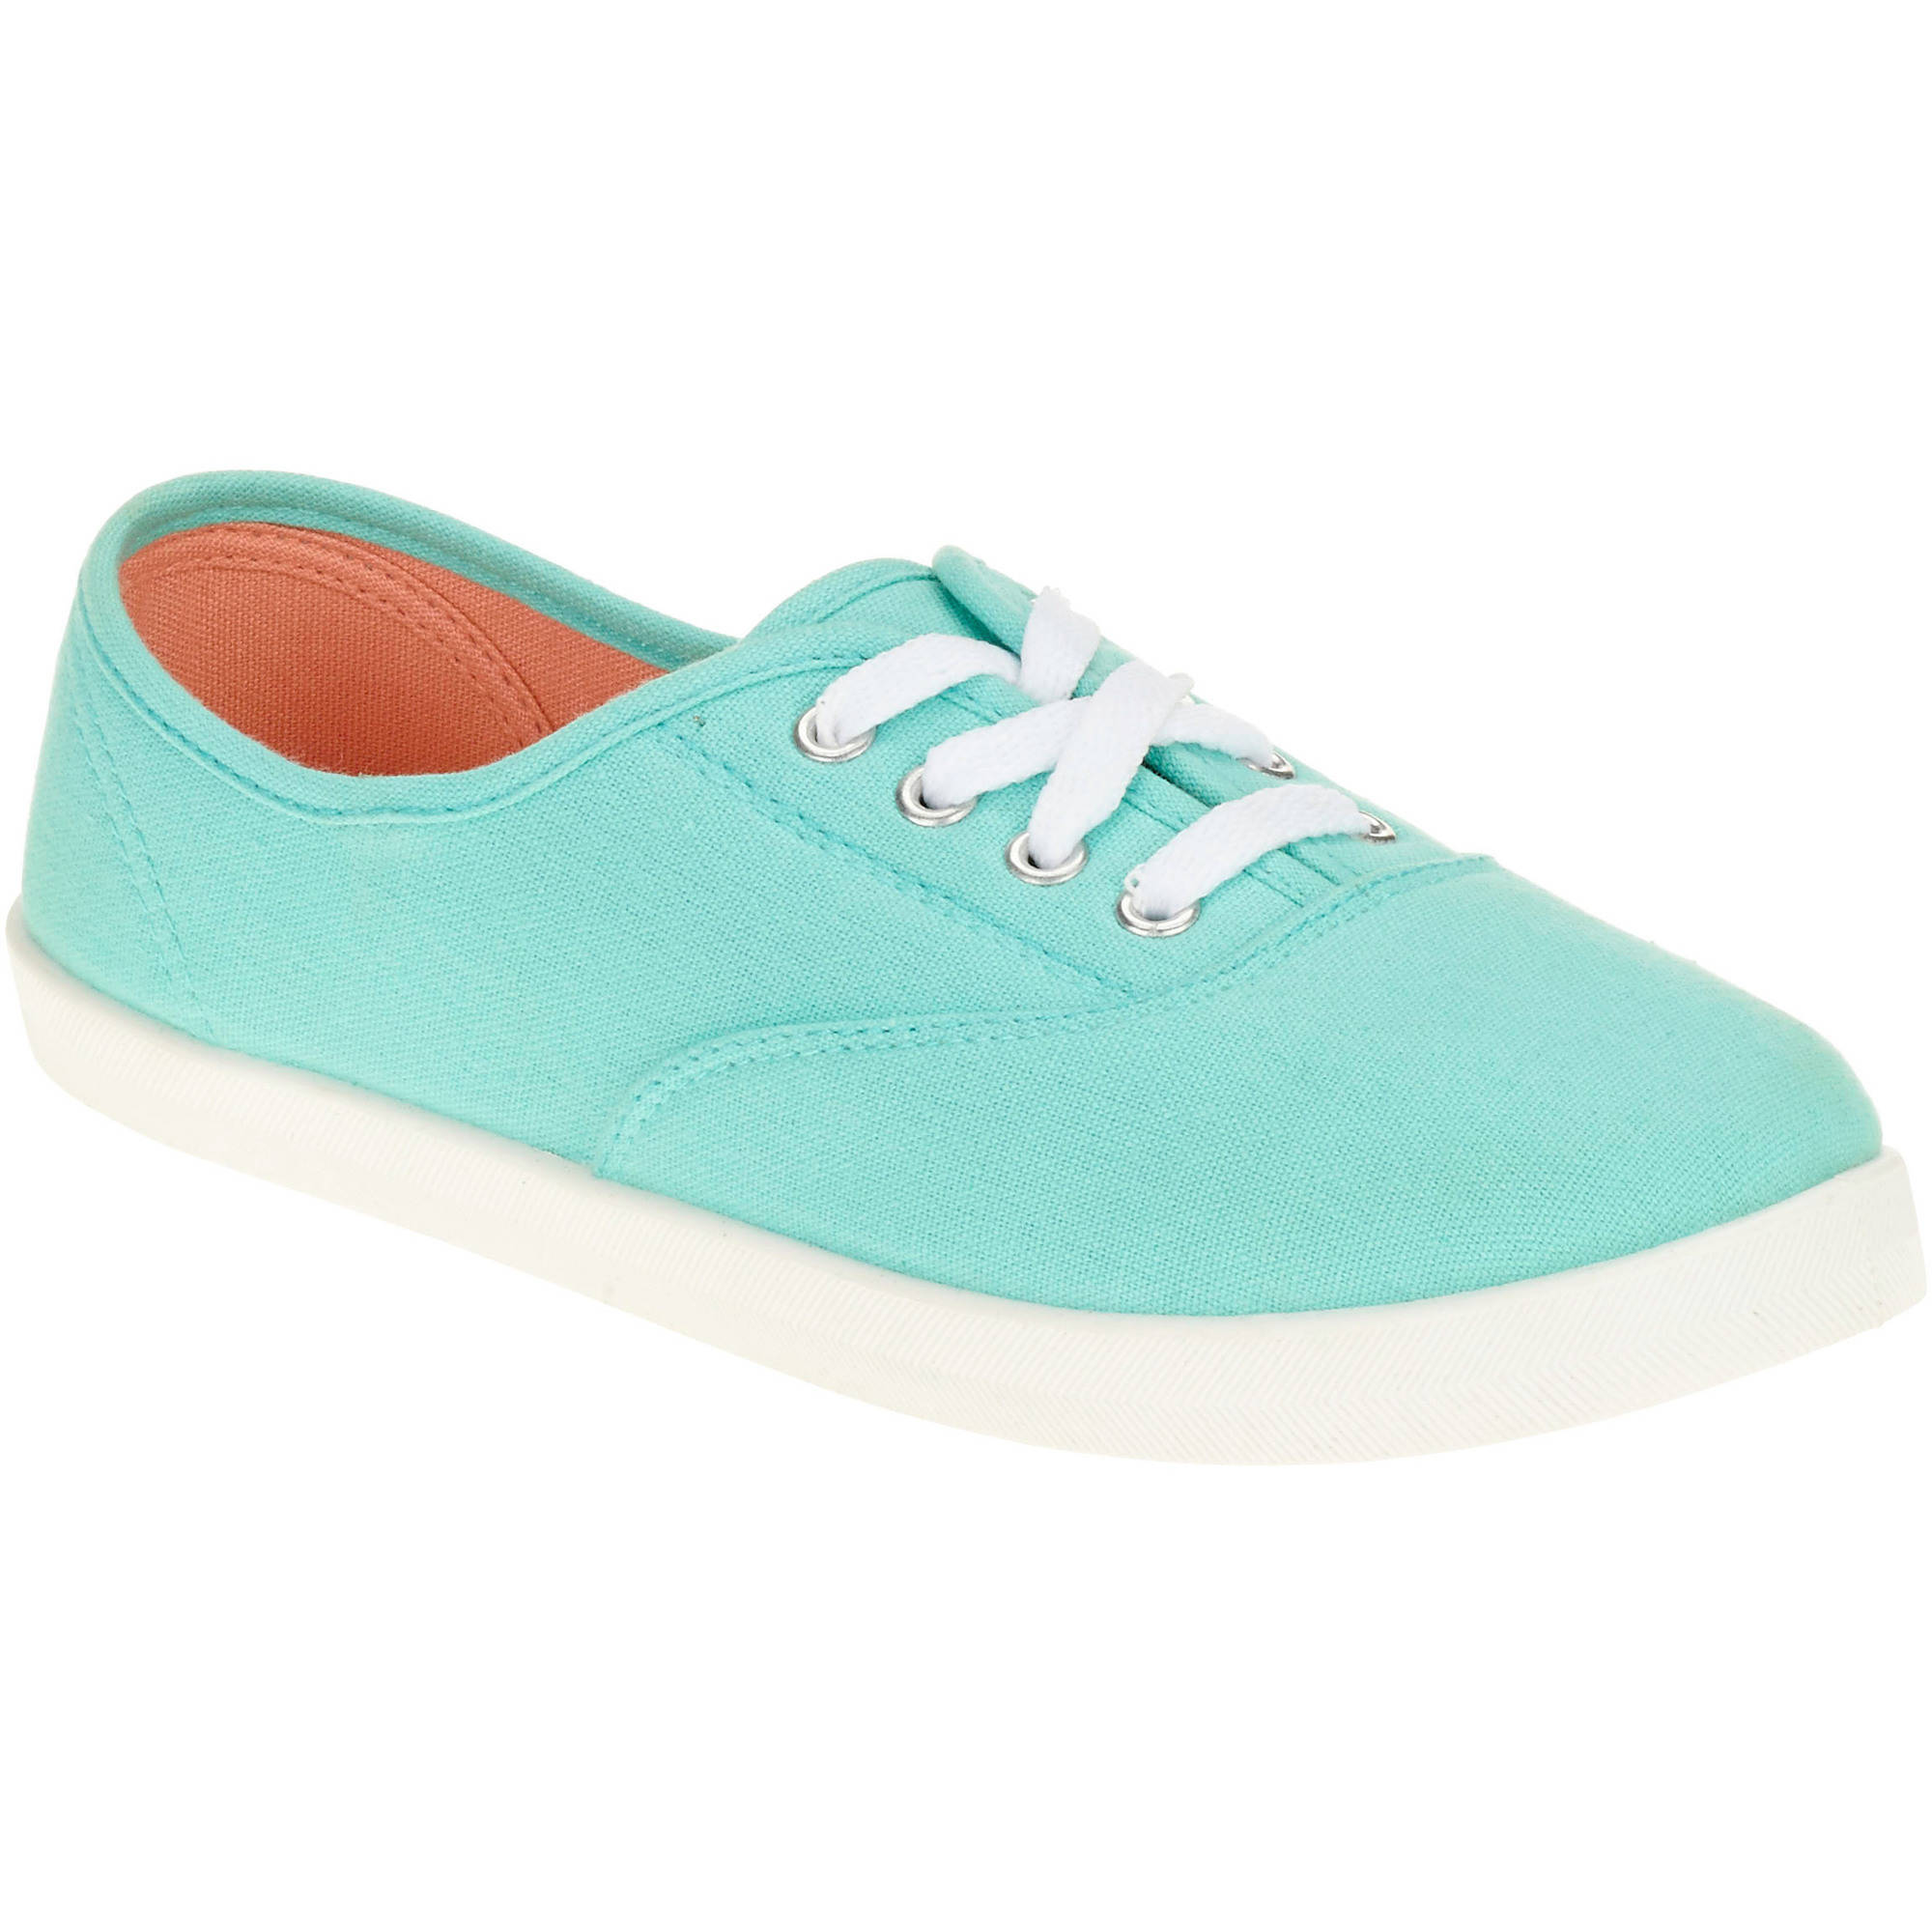 Women's Casual Canvas Lace-up Sneaker - image 1 of 5